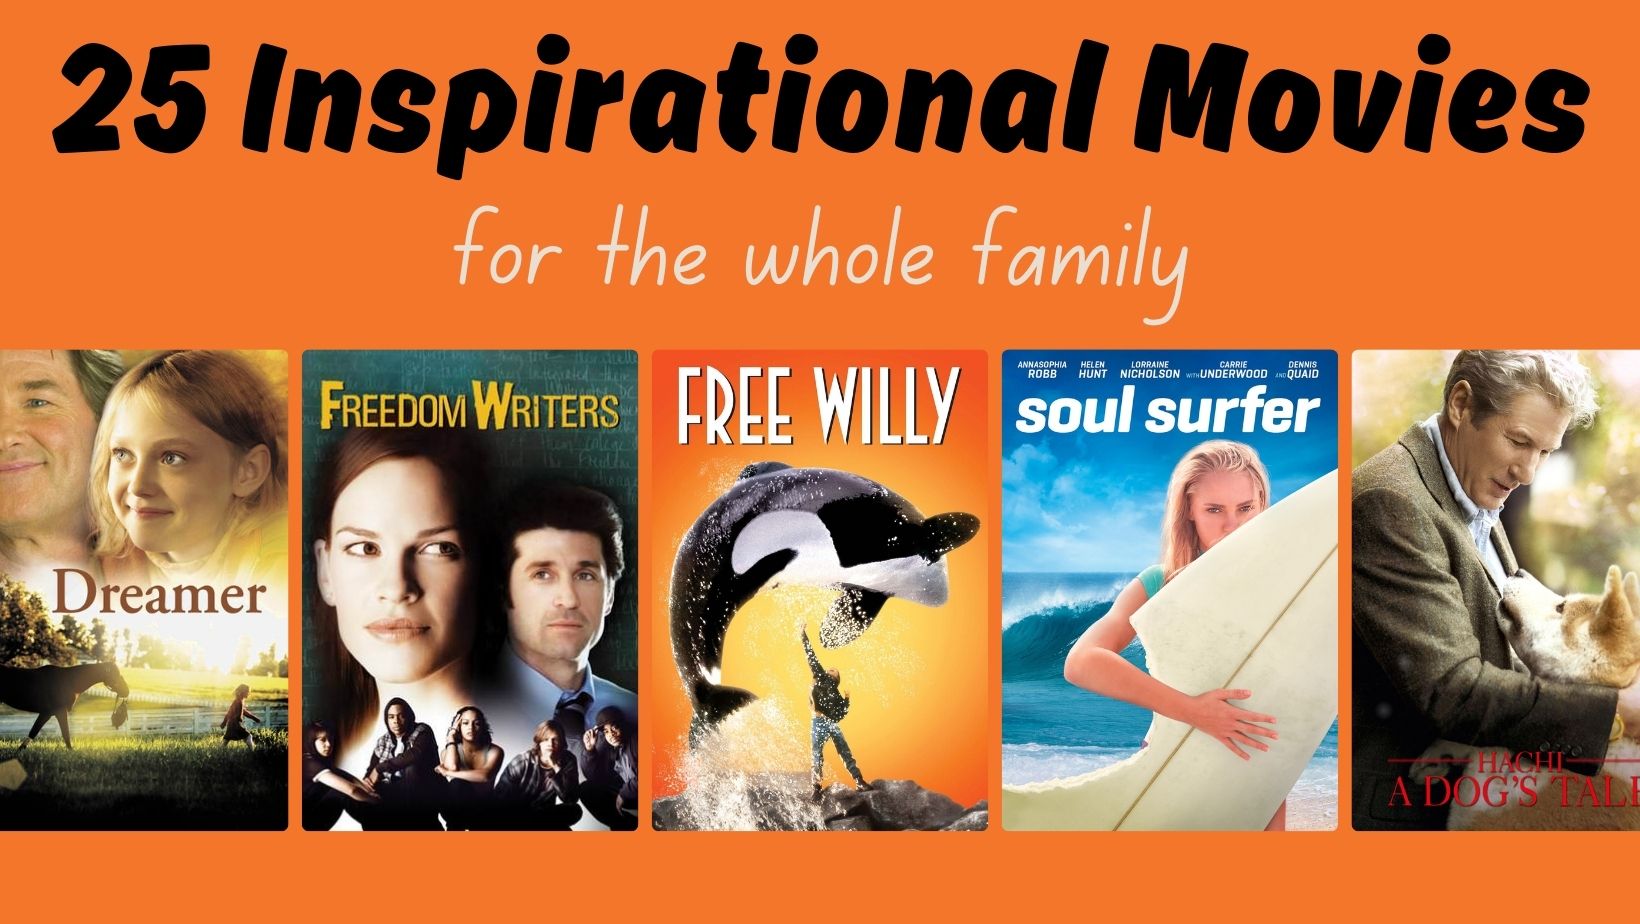 25 inspirational movies for the whole family